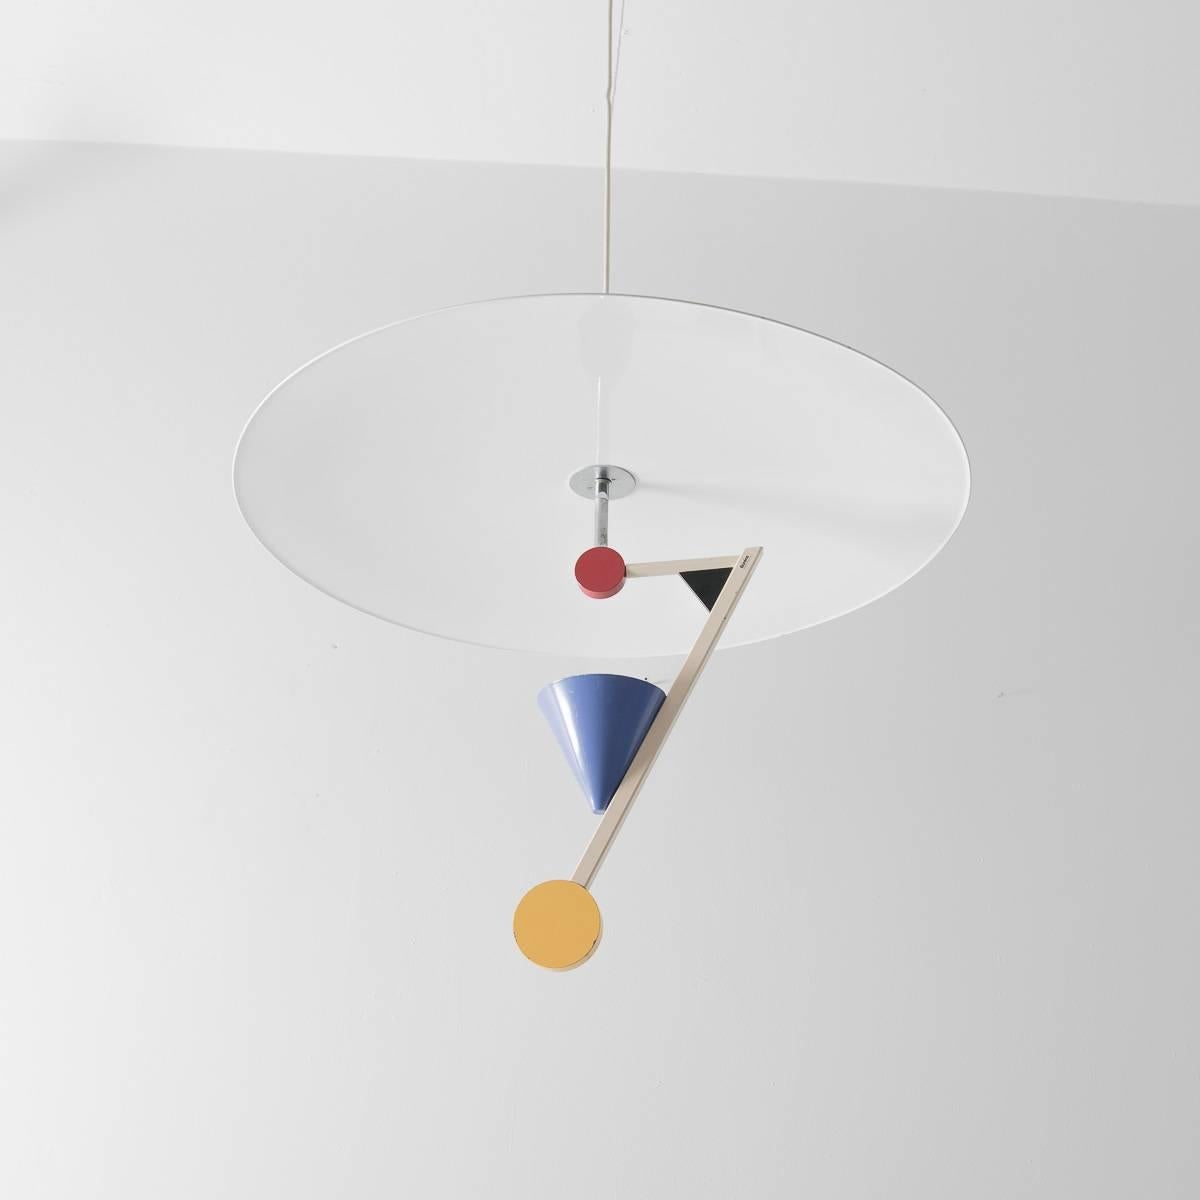 A large sculptural pendant designed by Olle Andersson for Swedish manufacturer Borens in 1982. Constructed from metal the lamp won the “Excellent Swedish Design” award when released and is held in the collections of both the Swedish National and the